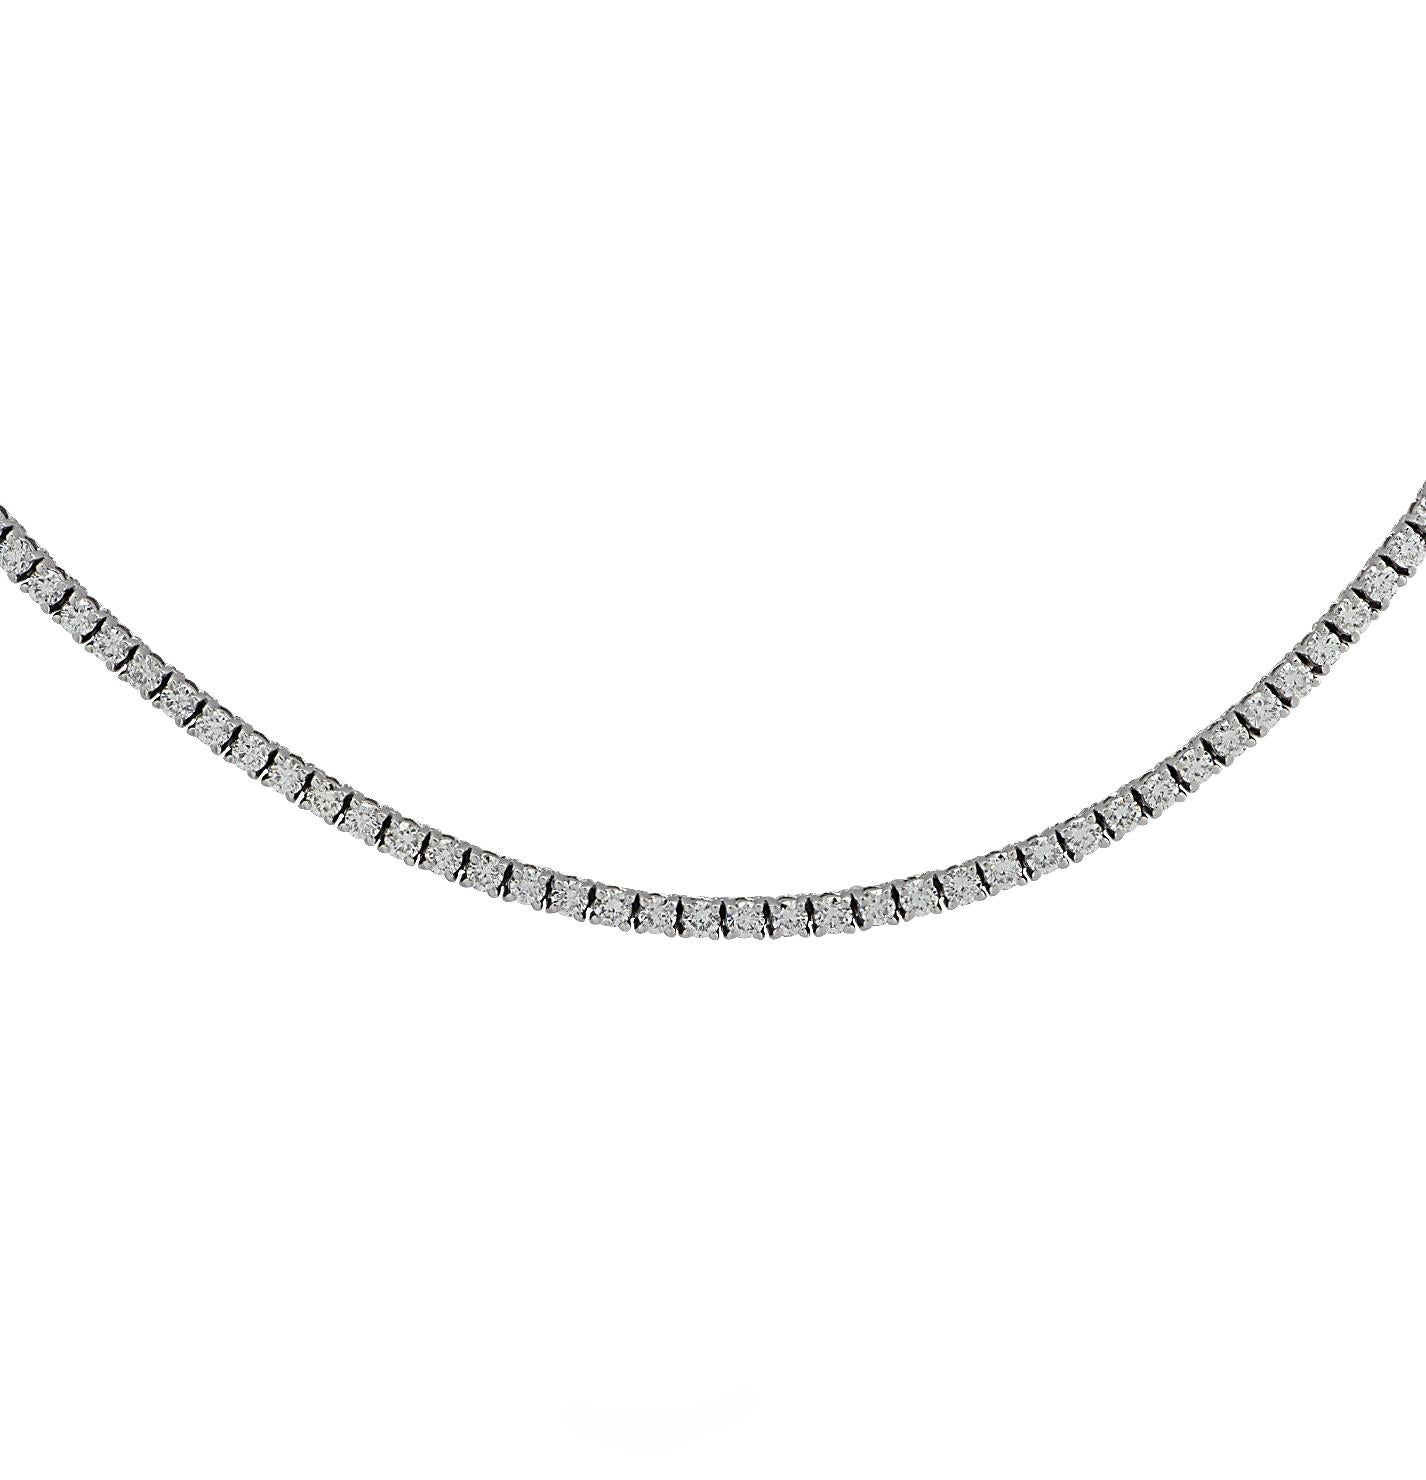 Exquisite Vivid Diamonds Straight Line diamond necklace crafted in White Gold, showcasing 179 round brilliant cut diamonds weighing 5.95 carats, F-G color, VS-SI Clarity. Each diamond was carefully selected, perfectly matched and set in a seamless